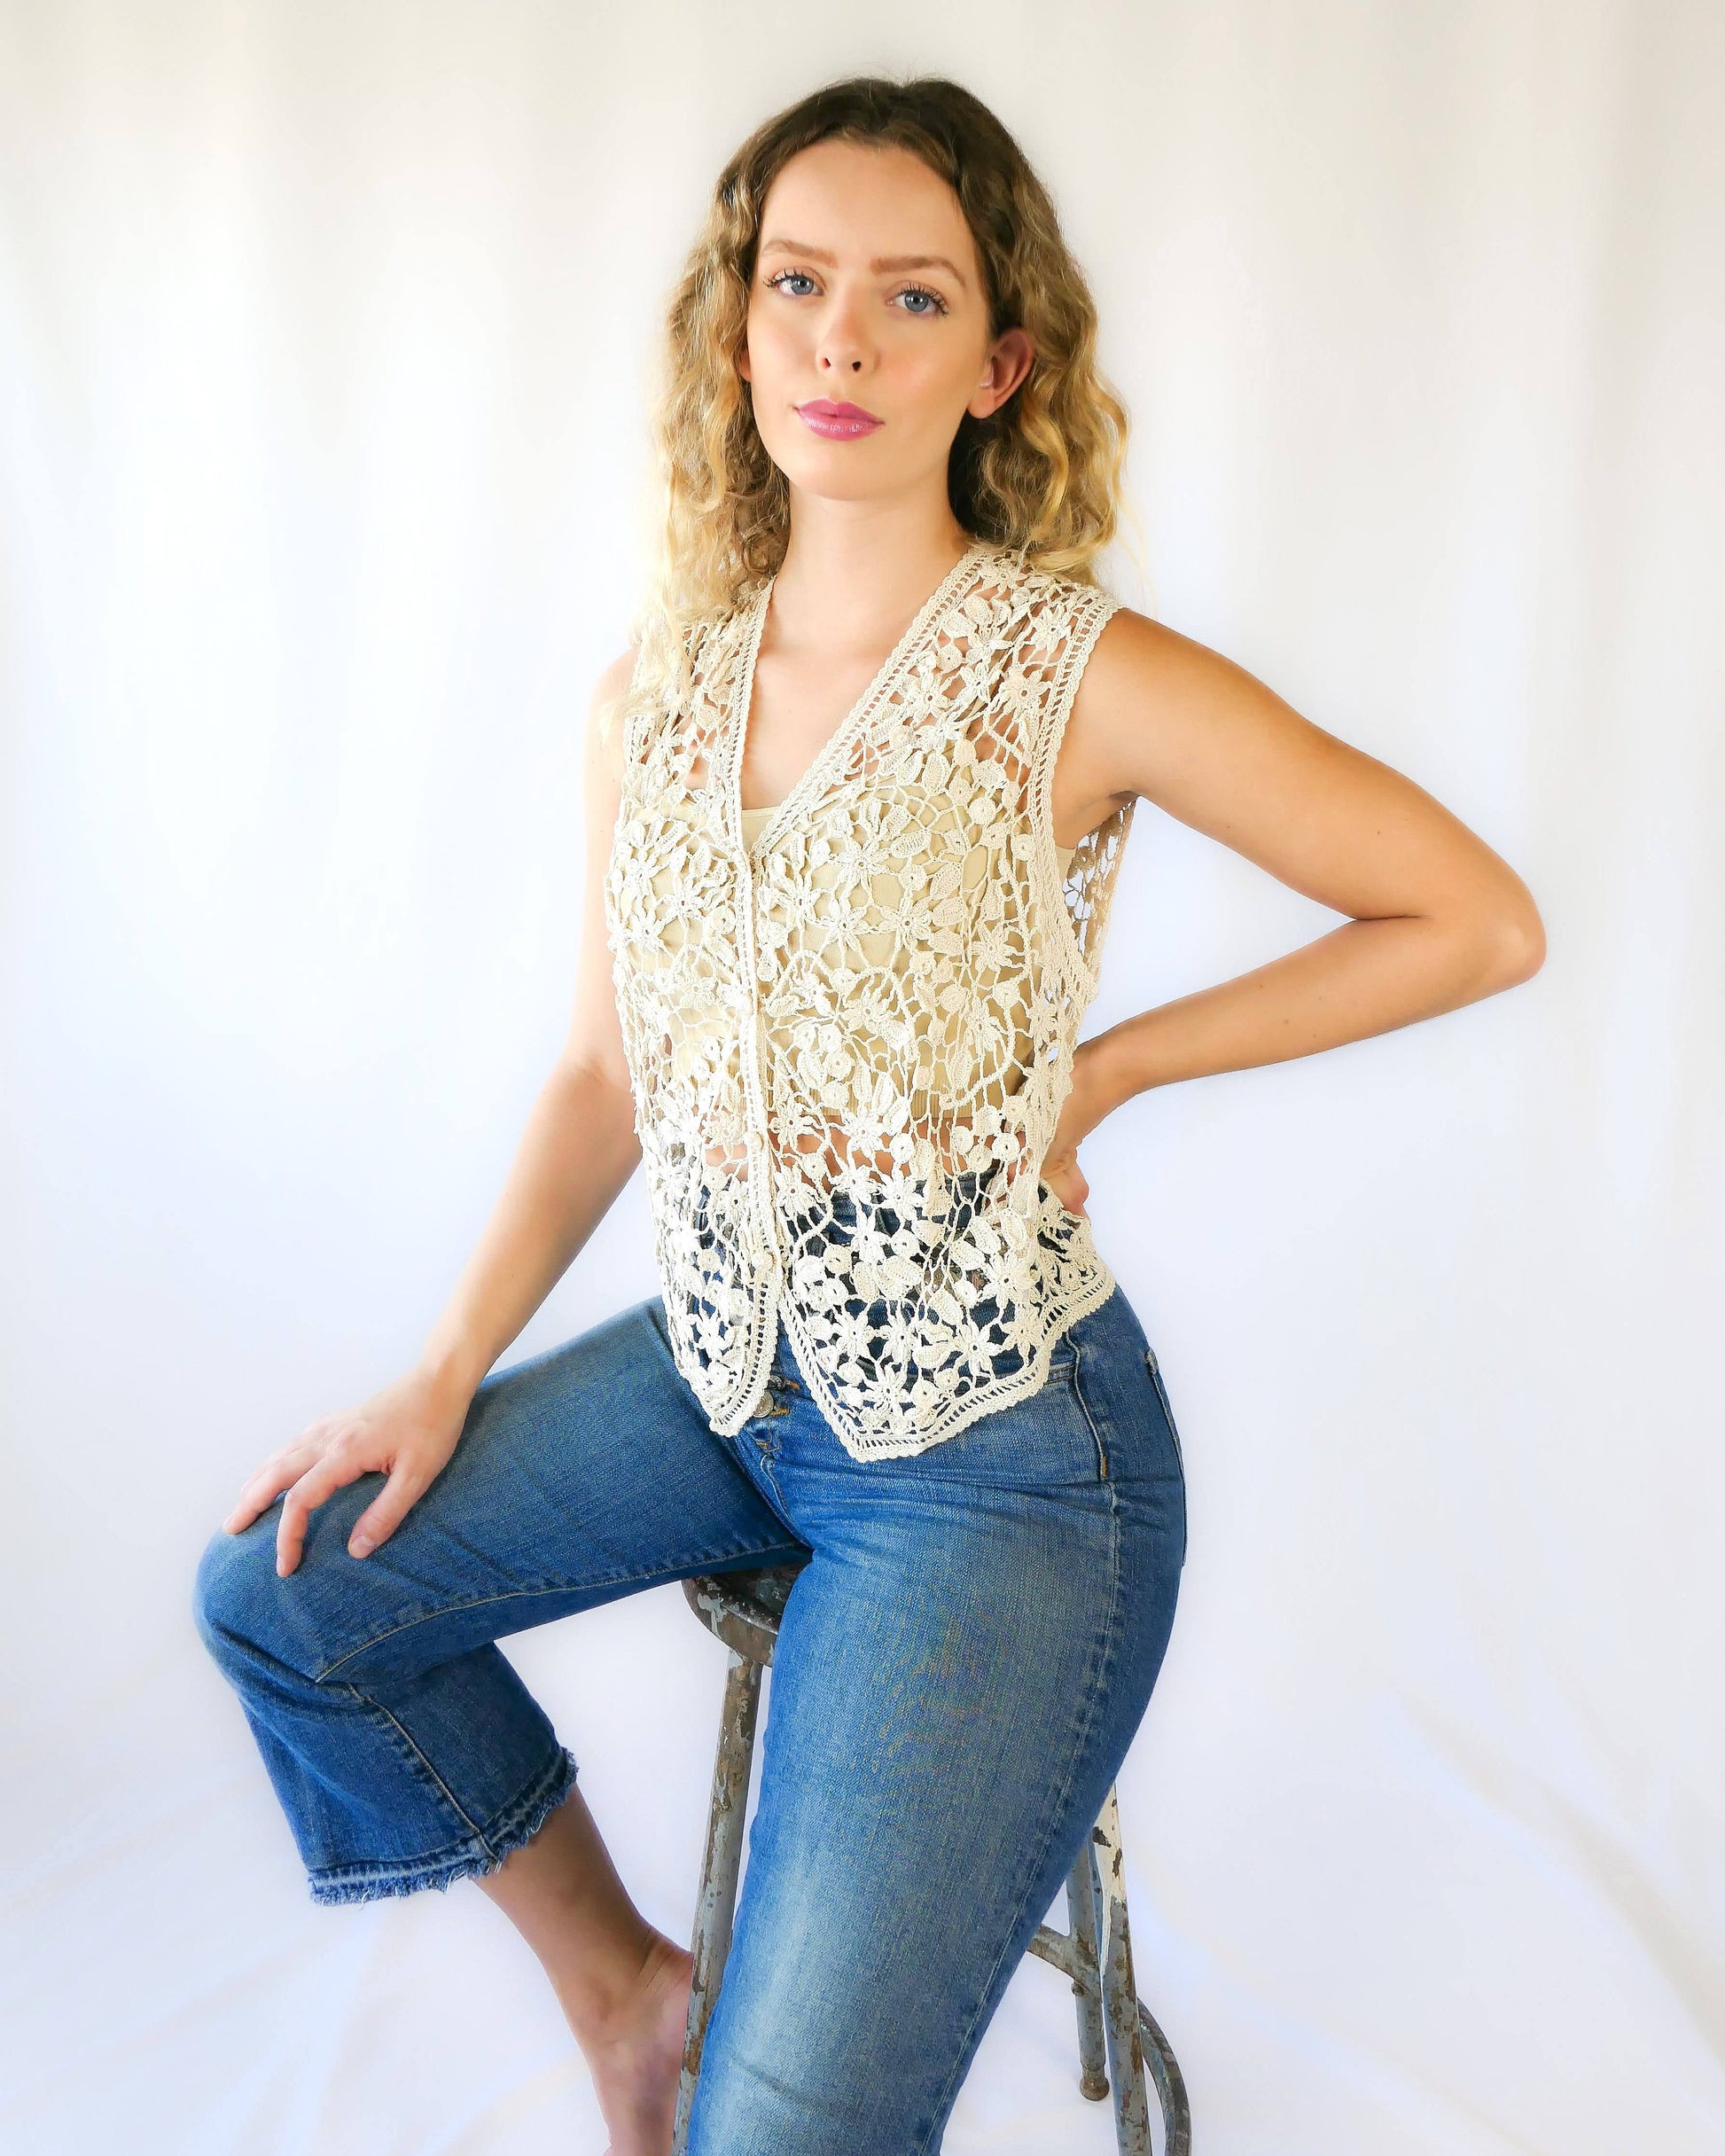 A Lim's Vintage original hand crocheted vest from the 1990s with a repeating jasmine floral and leaf motif throughout. Refined, delicate, and a vintage accent to your everyday wardrobe. Buttons up the front but can also be left open and worn over a bikini bra, tank top, or even a long sleeve shirt or blouse during cooler months. Due to the handmade nature of this vest, the length and bust circumference may vary slightly from piece to piece. Model is wearing natural color vest.